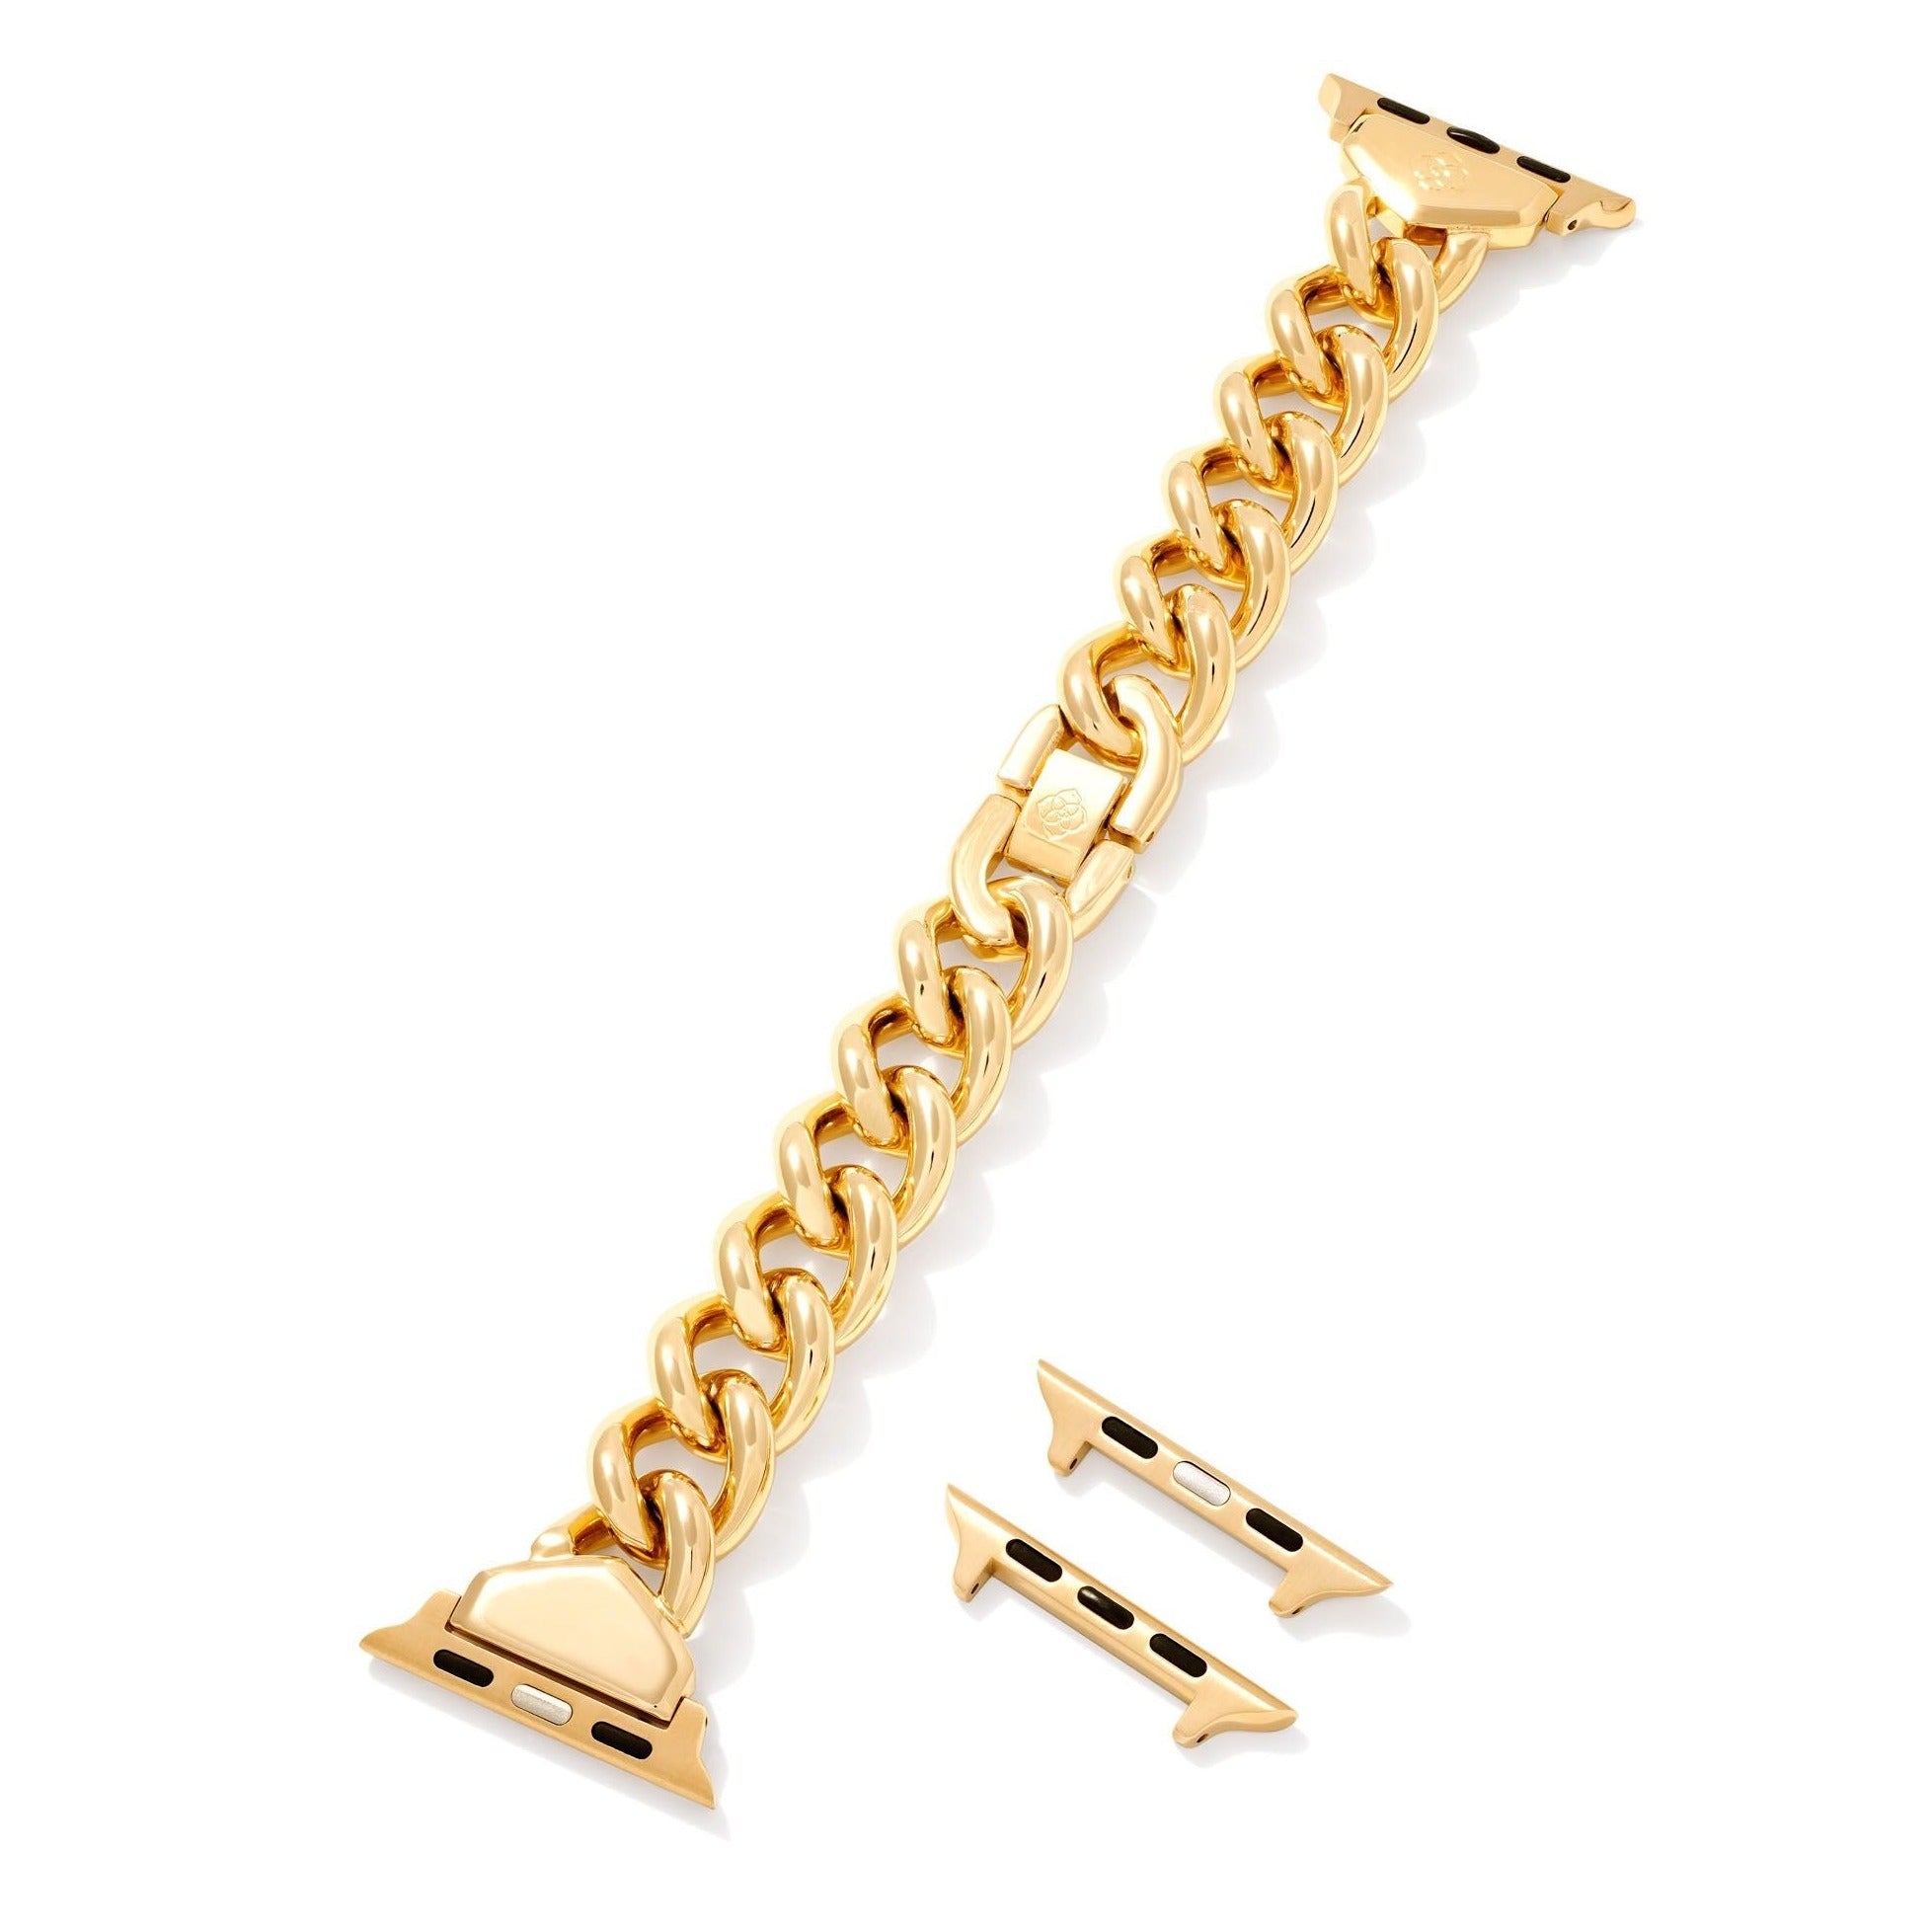 Kendra Scott | Whitley Chain Watch Band in Gold Tone Stainless Steel